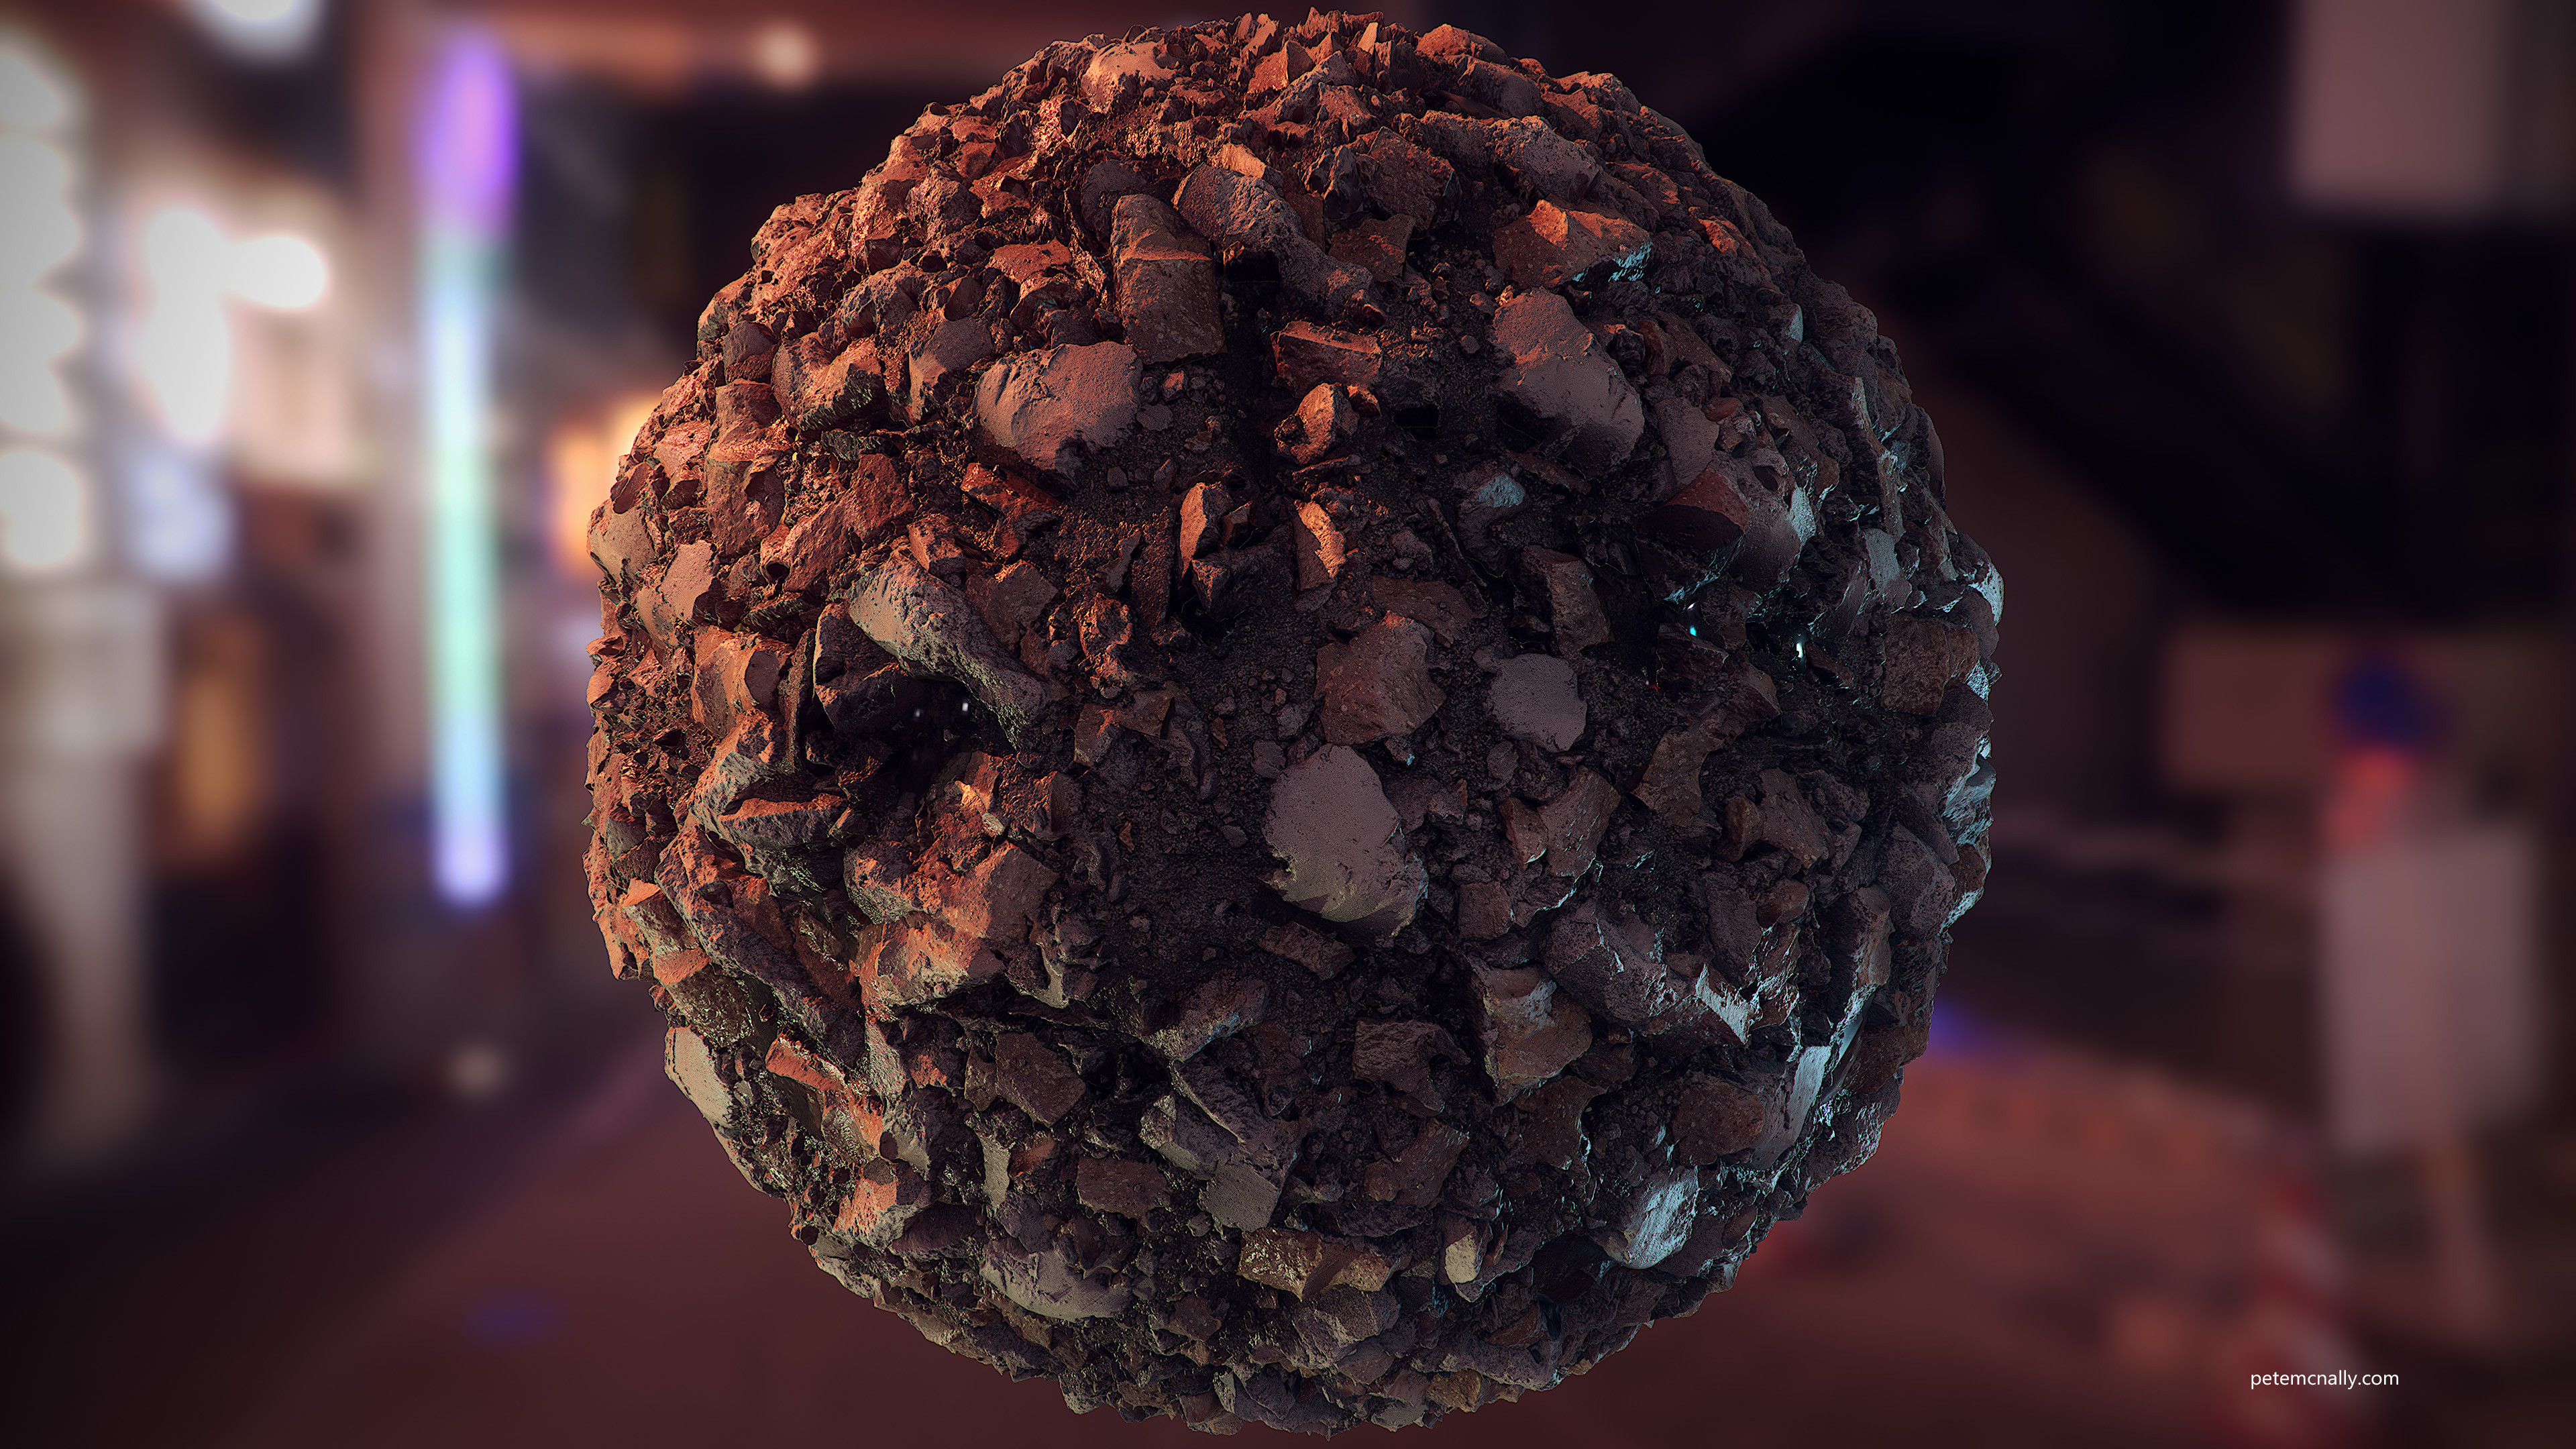 Material sphere lookdev, partly inspired by the lighting of Cyberpunk 2077